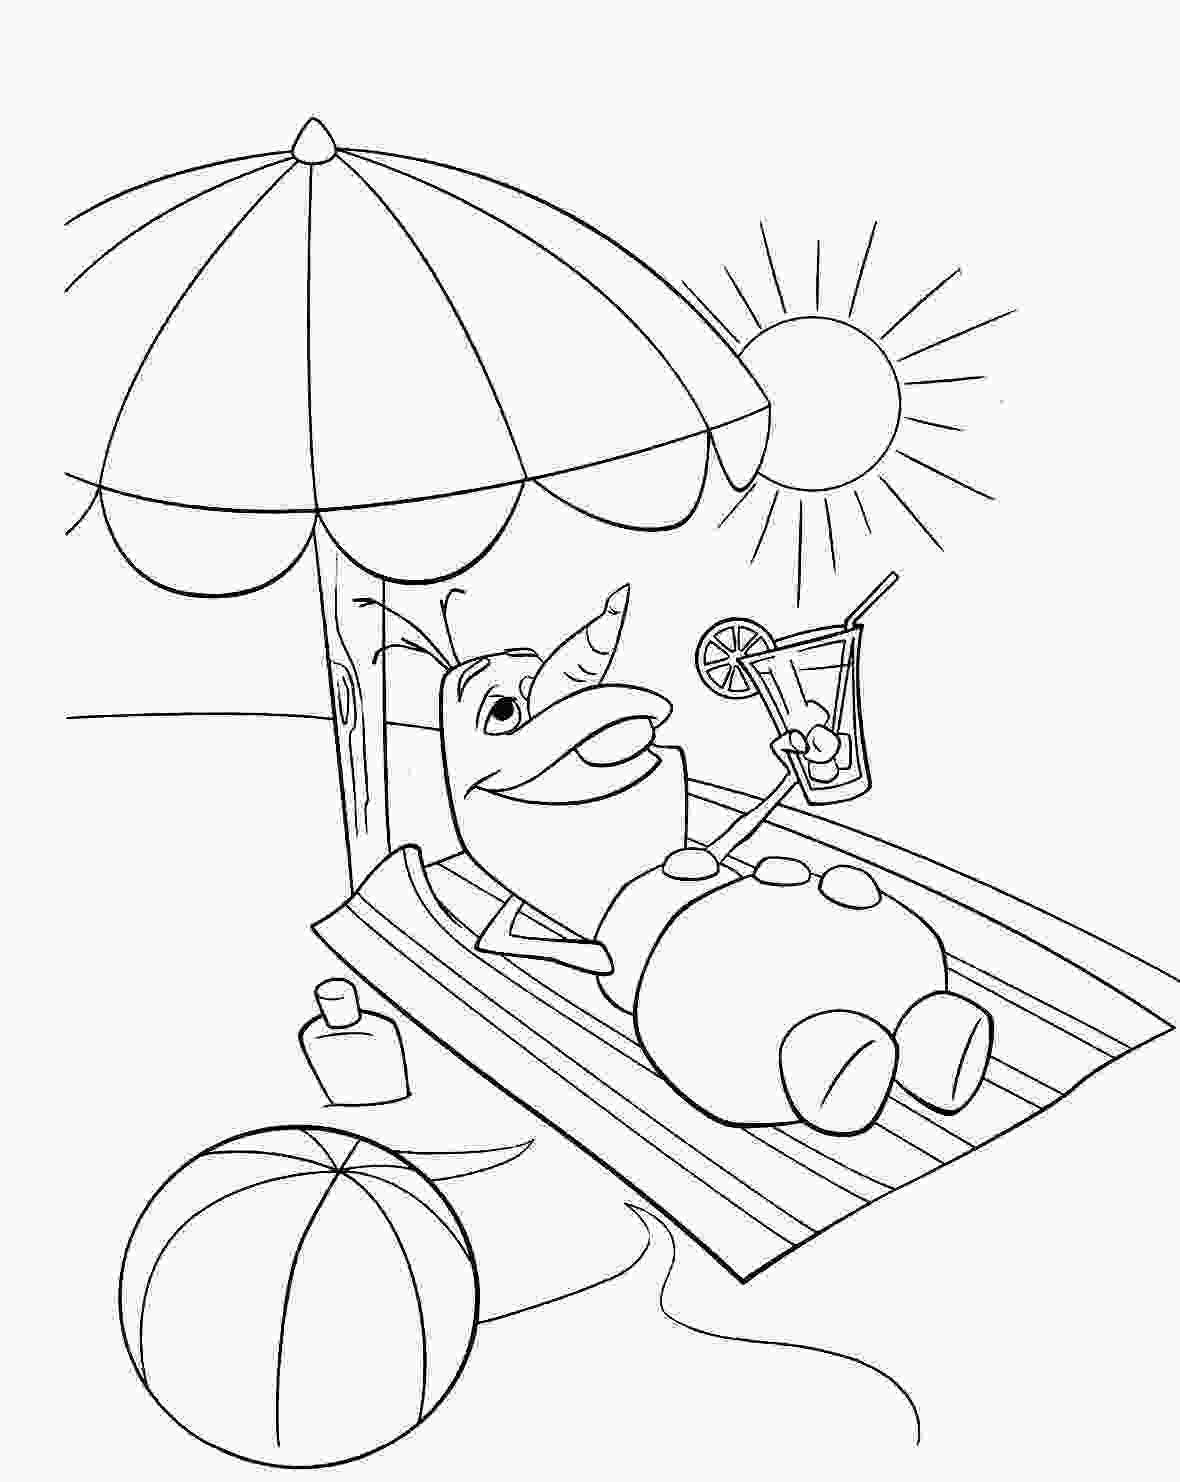 Coloring pages free summer coloring pages picture ideas word searchle for kids to print sheets puzzles